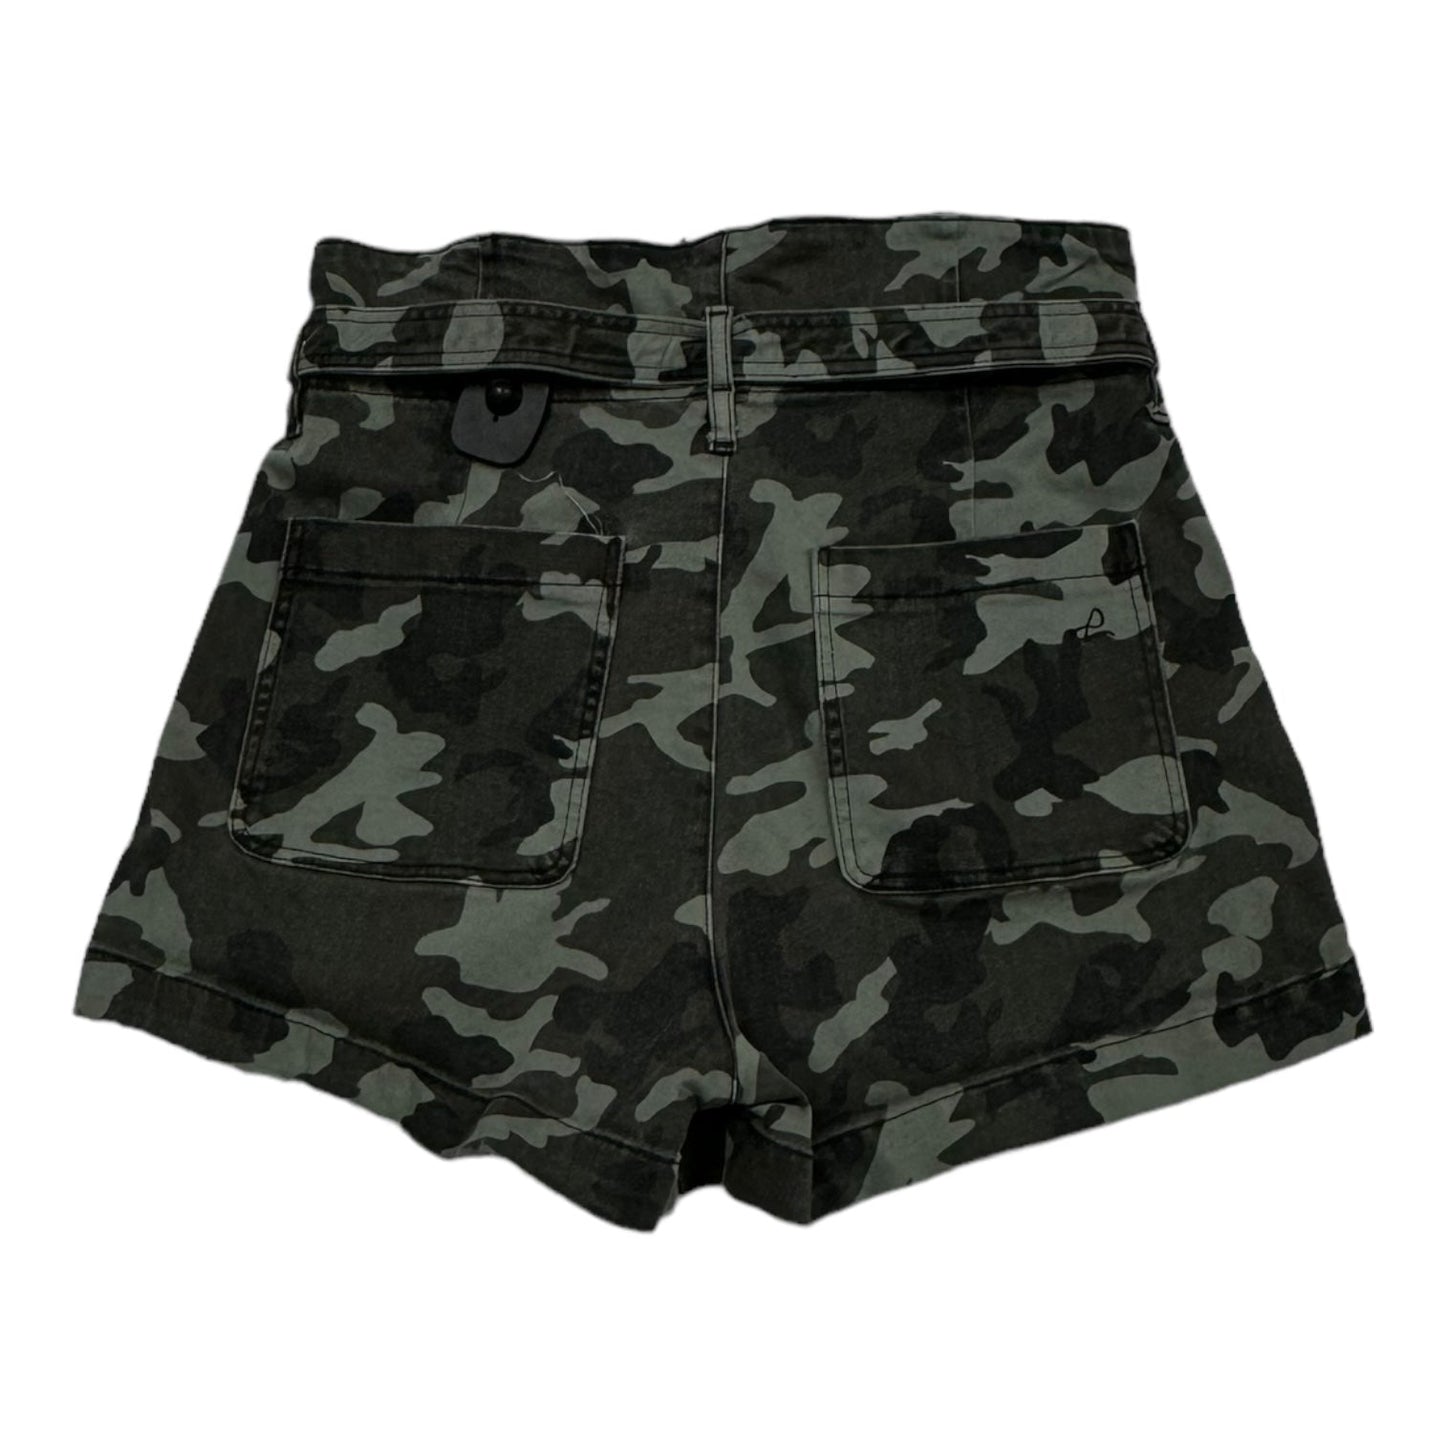 Camouflage Print Shorts Dl1961, Size 8